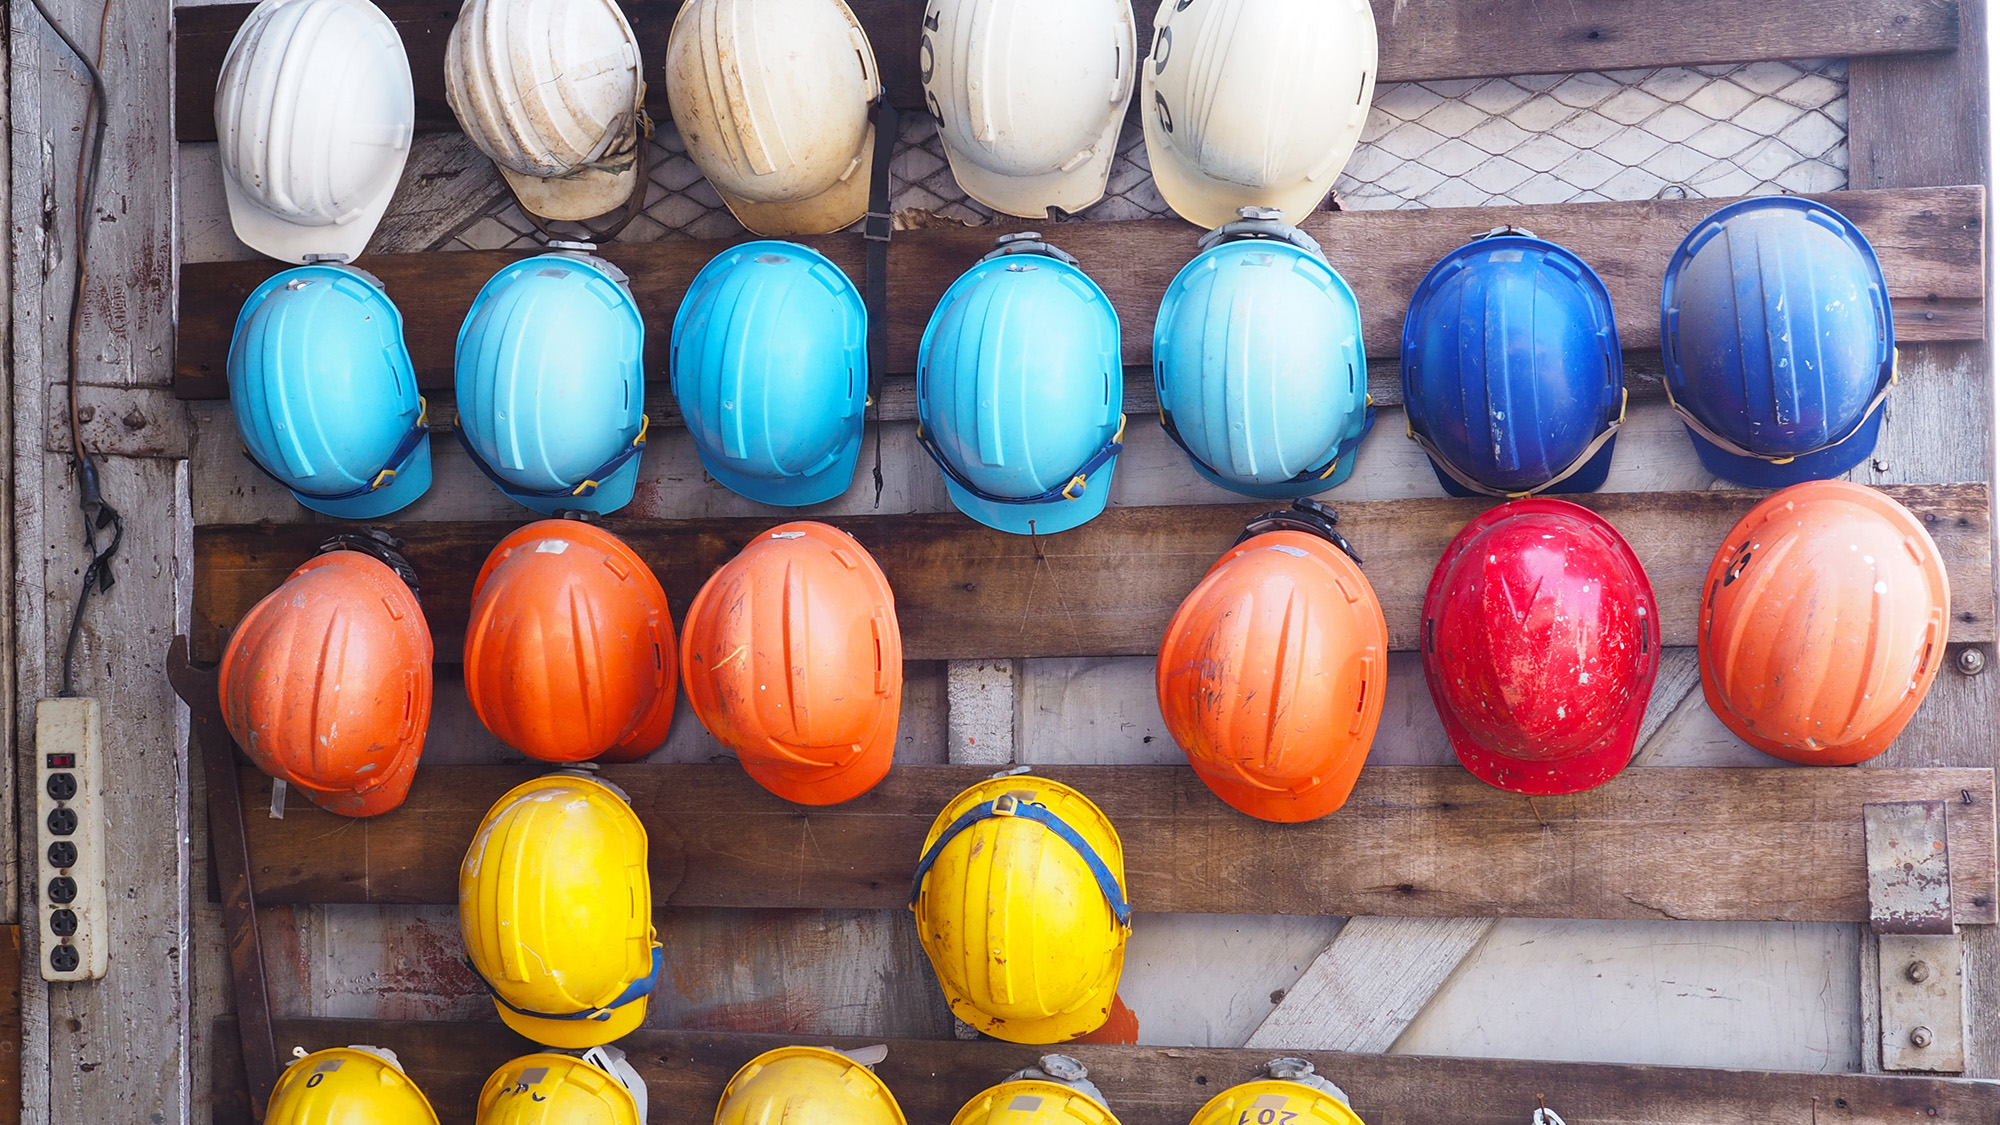 a collection of hard hats awaiting use